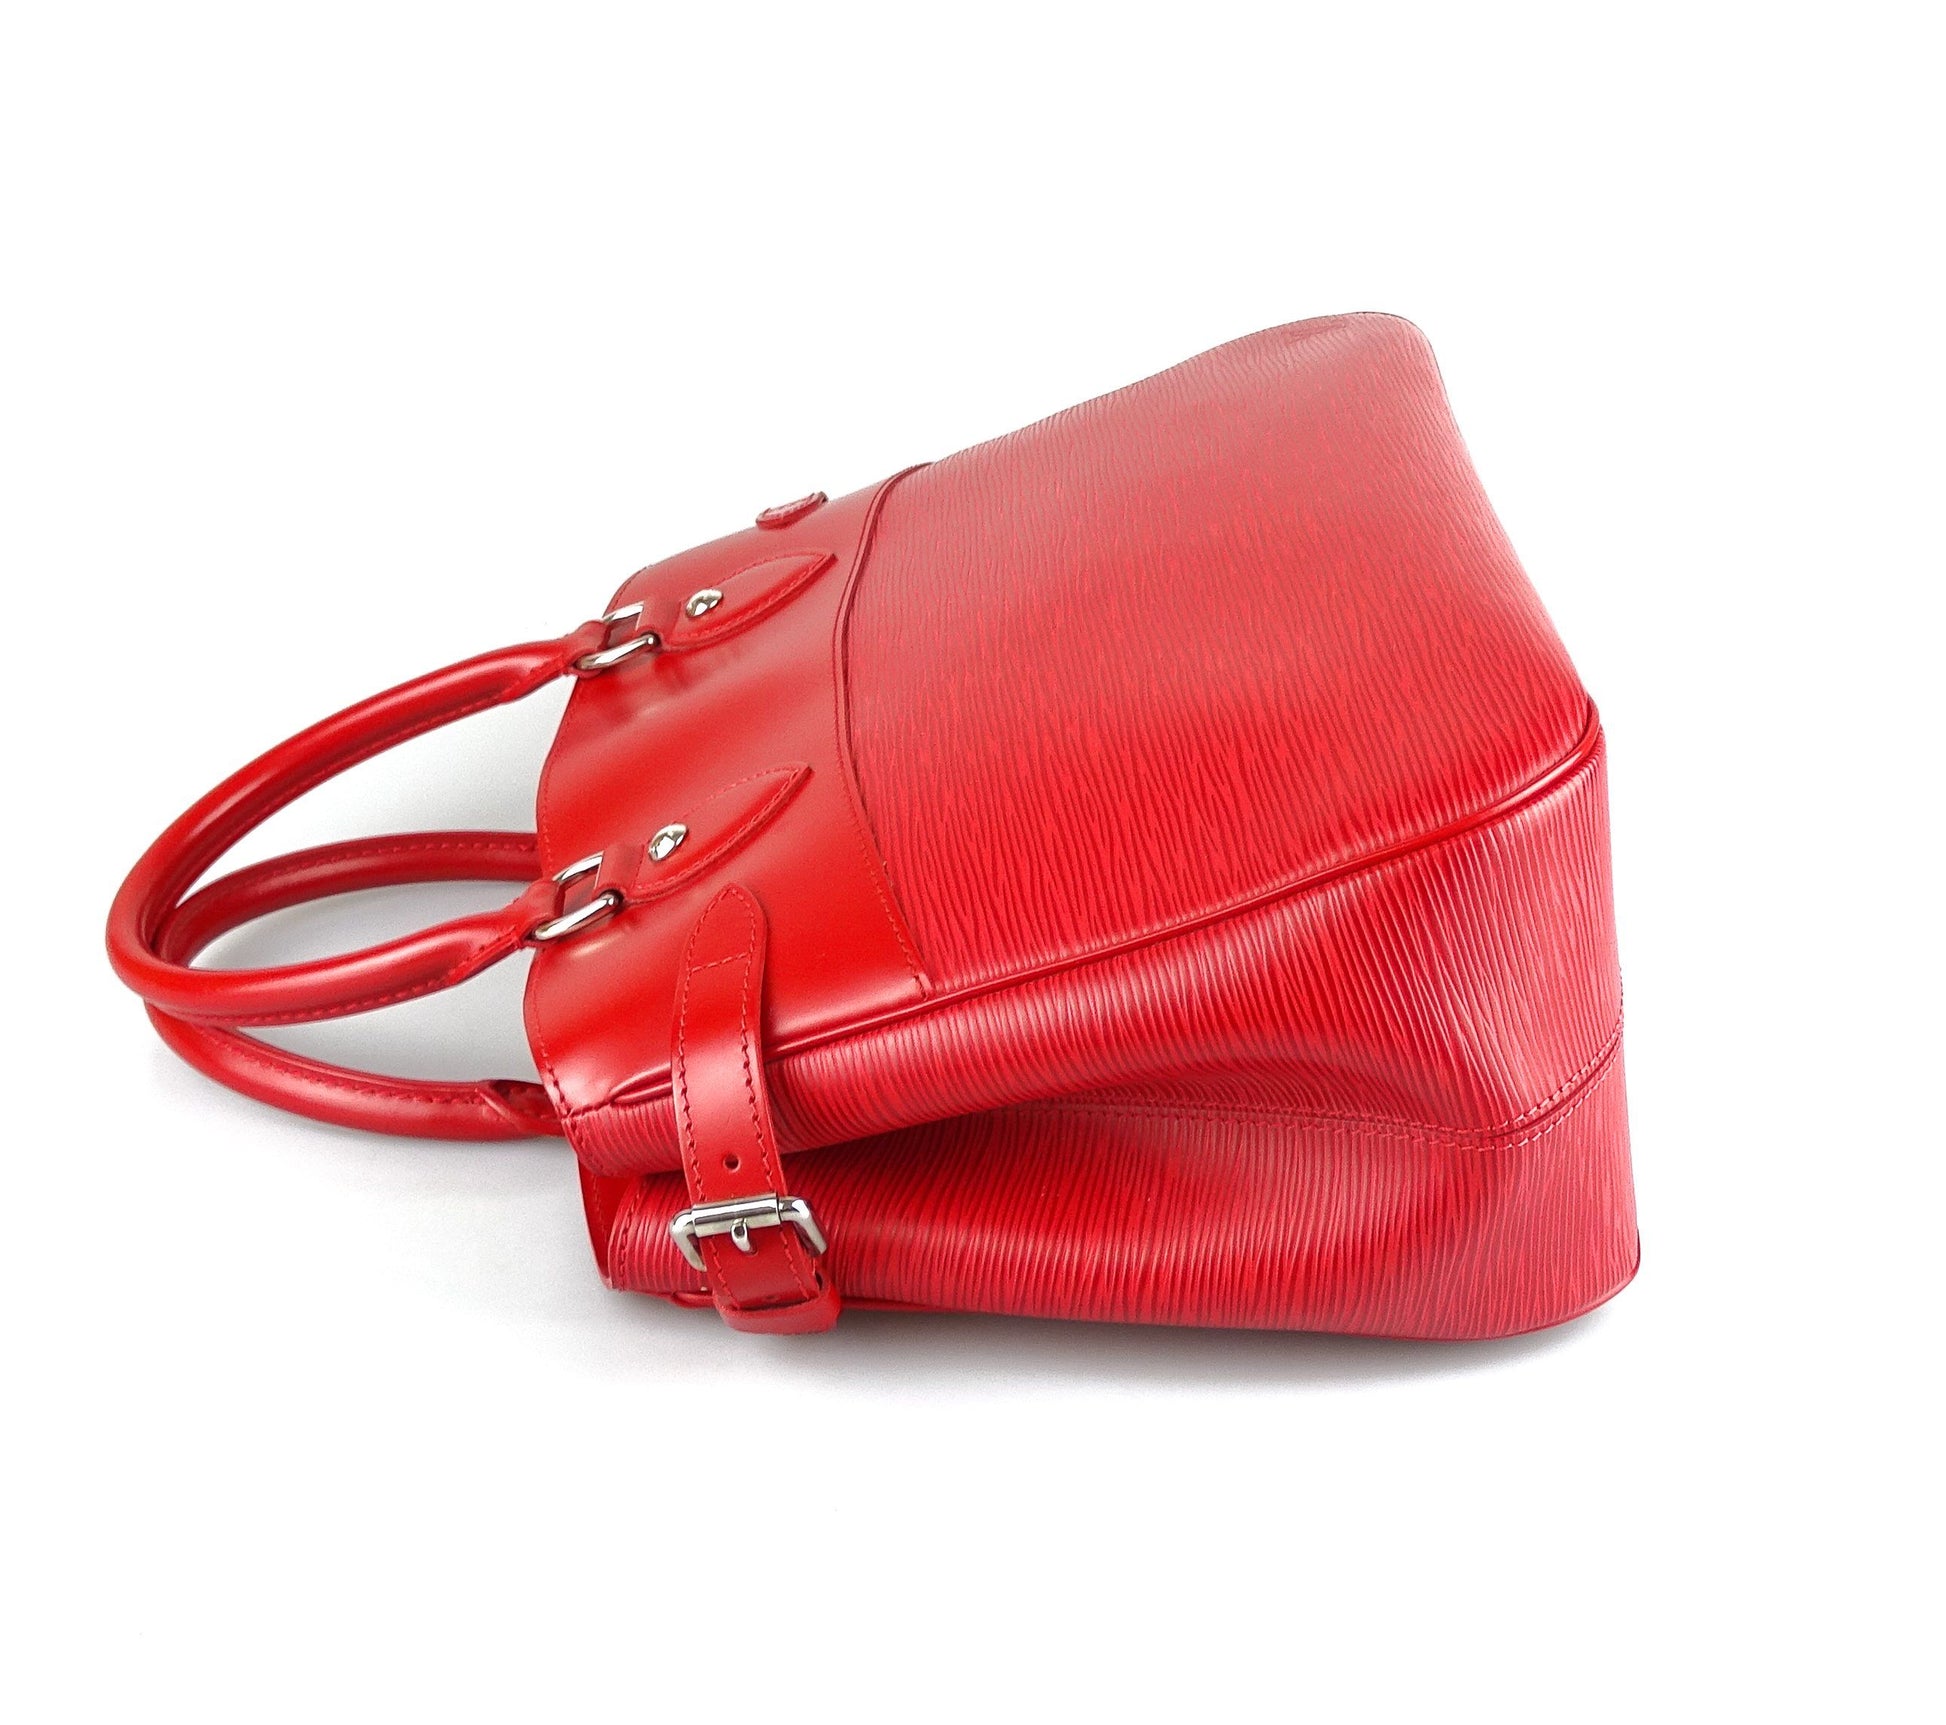 Sold at Auction: LOUIS VUITTON - RED EPI LEATHER PASSY